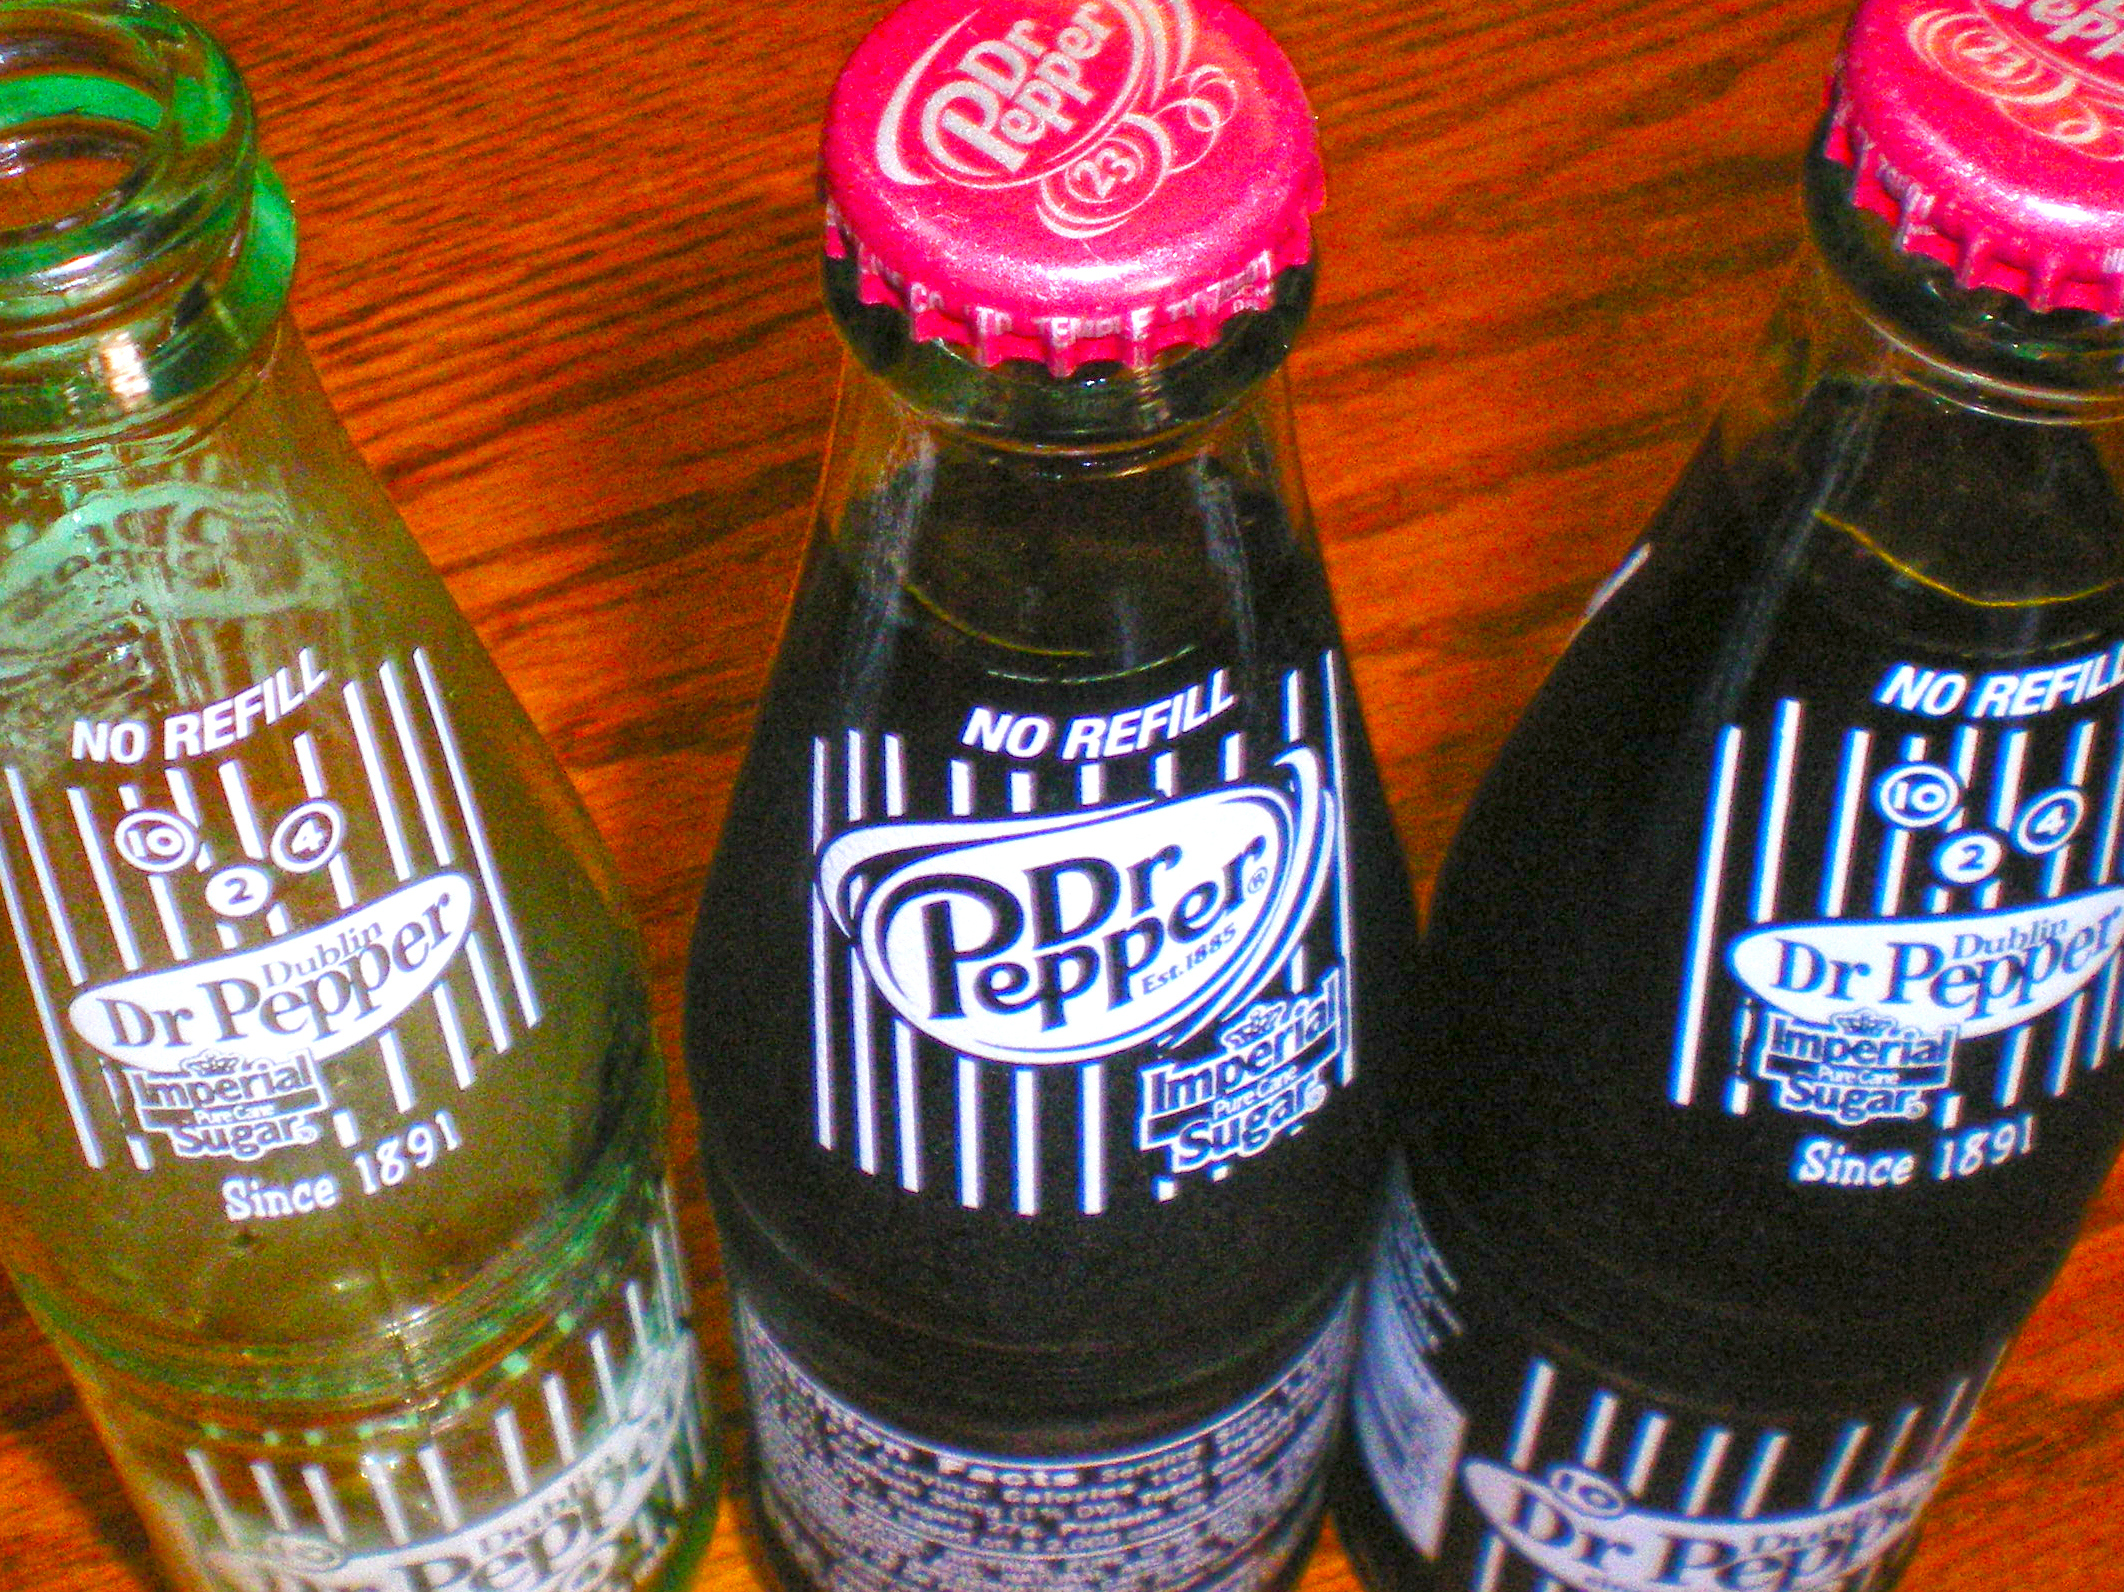 Dublin, Texas, United States - January 2, 2007: The last few Dr. Pepper bottles made with real imperial sugar.  Drink it up at 10, 2, and 4.